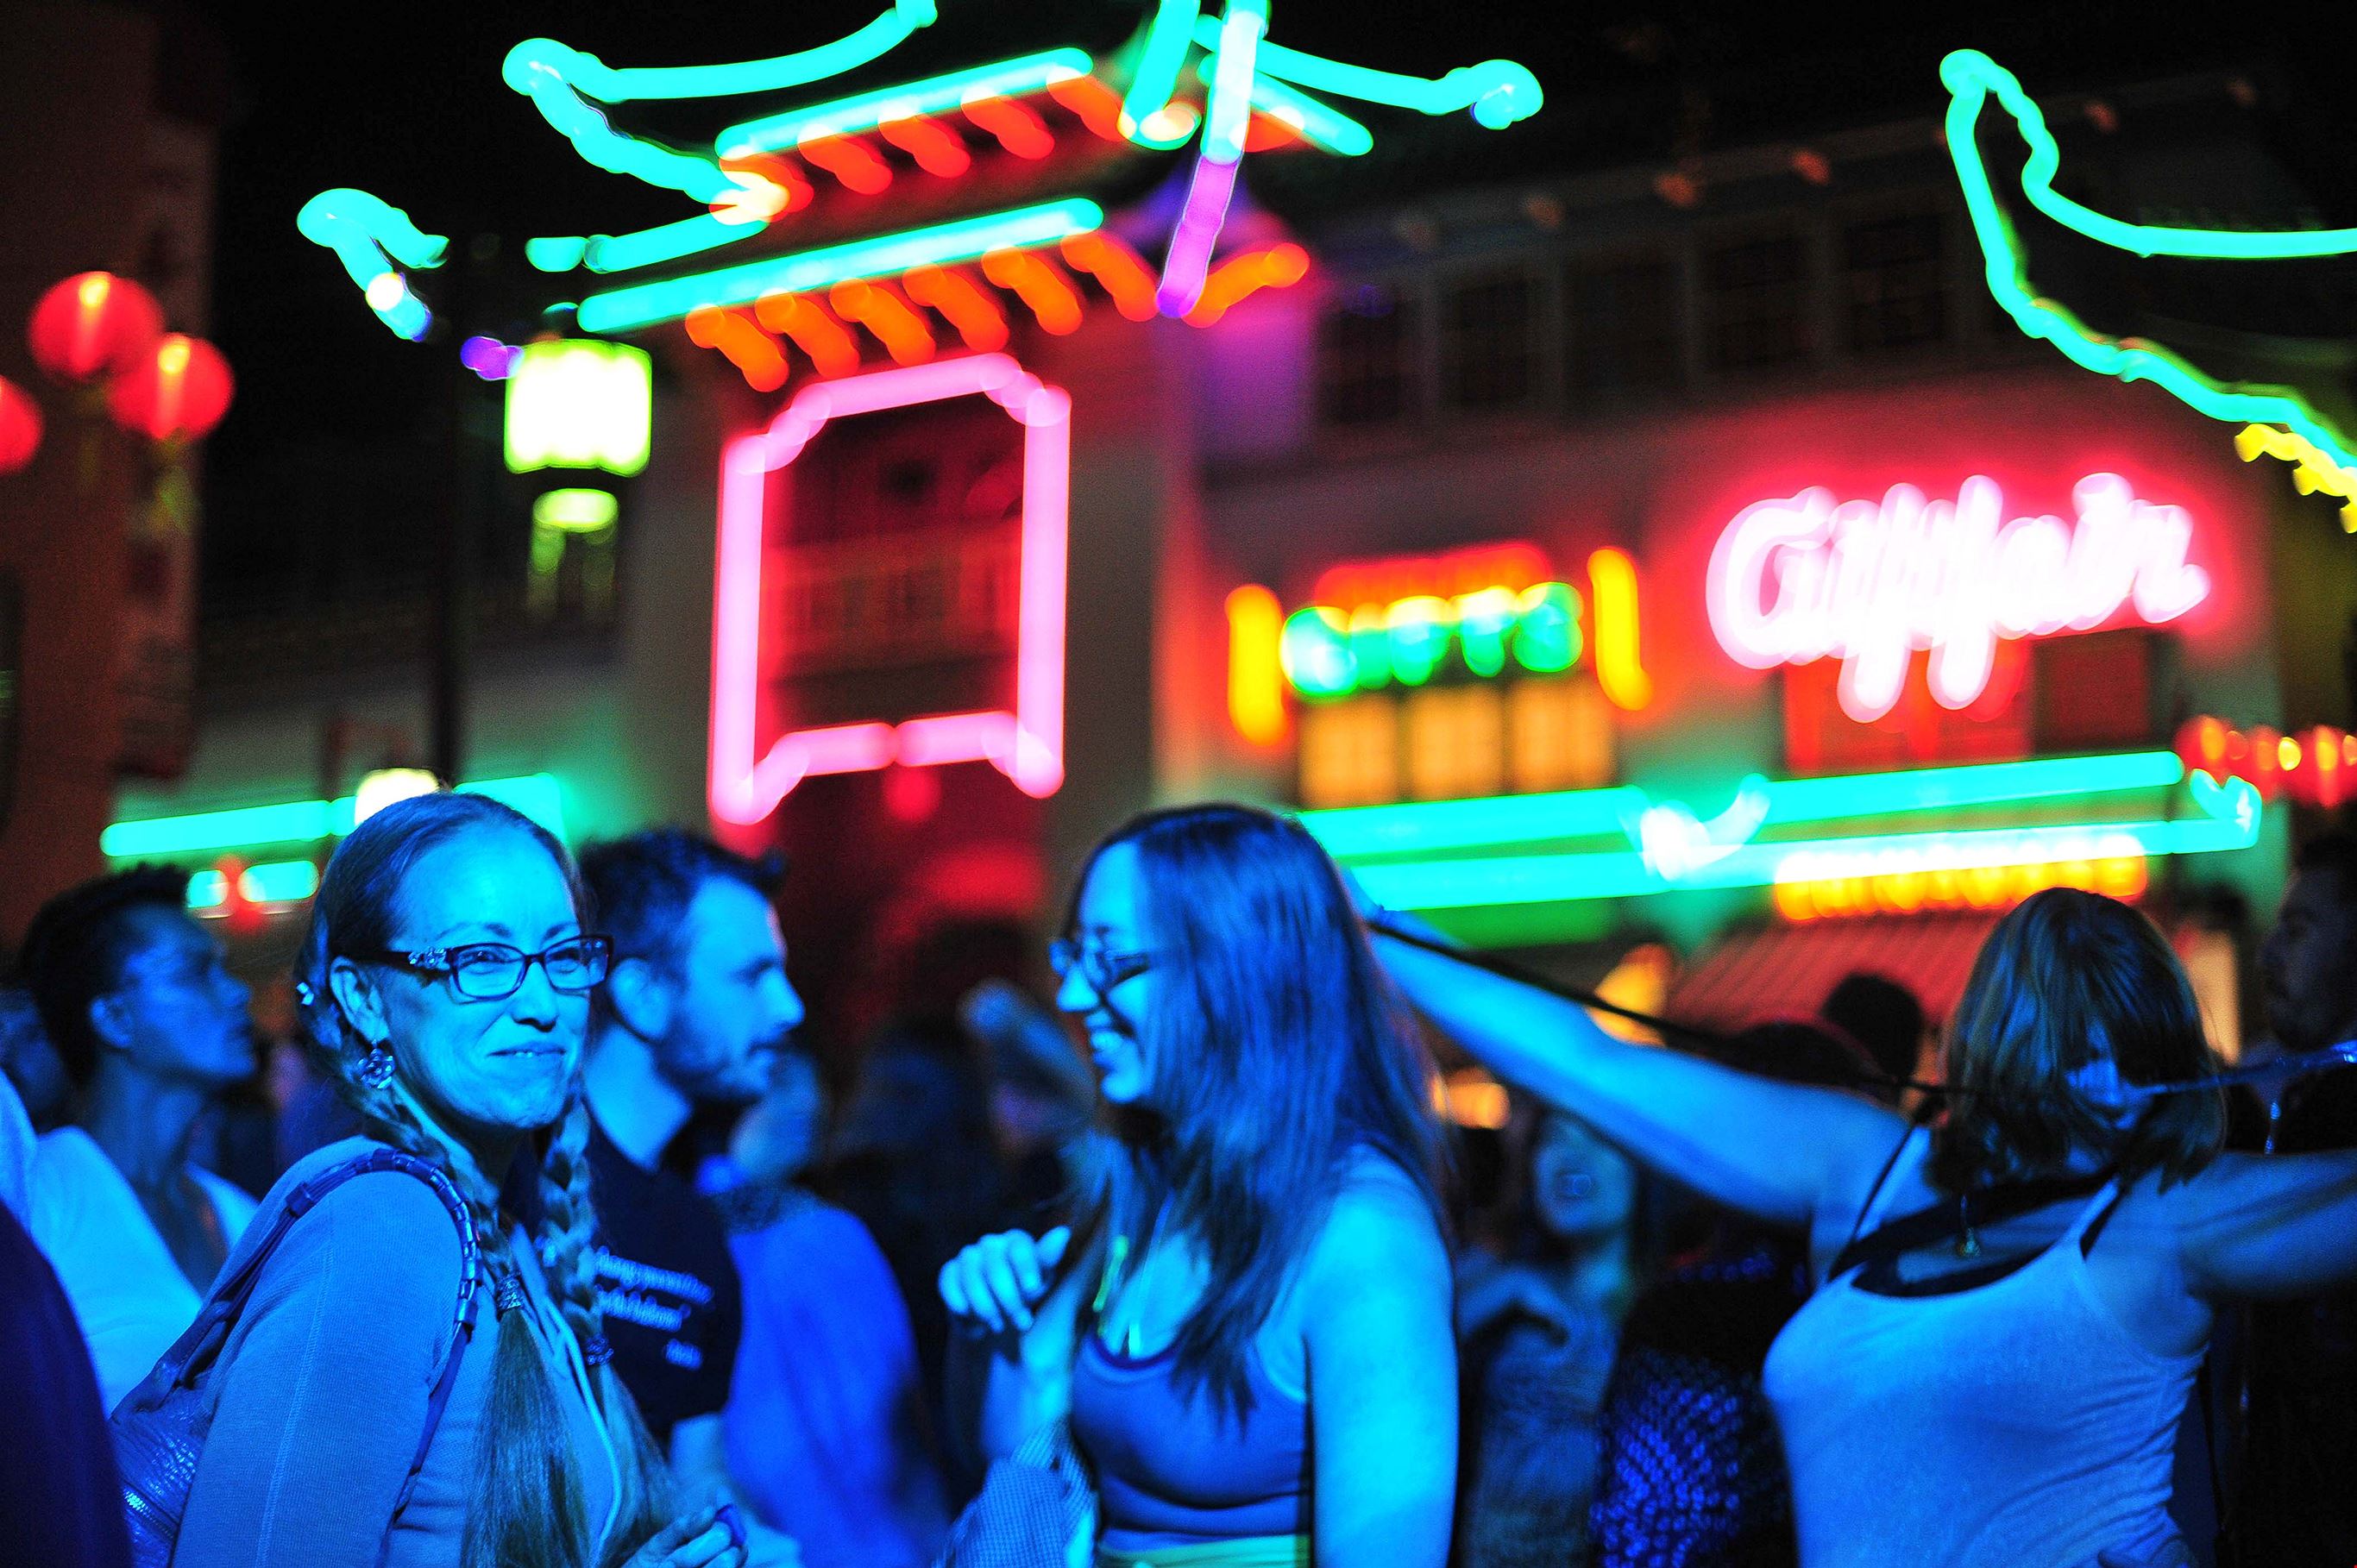 Chinatown Summer Nights Destinations and Events Metrolink